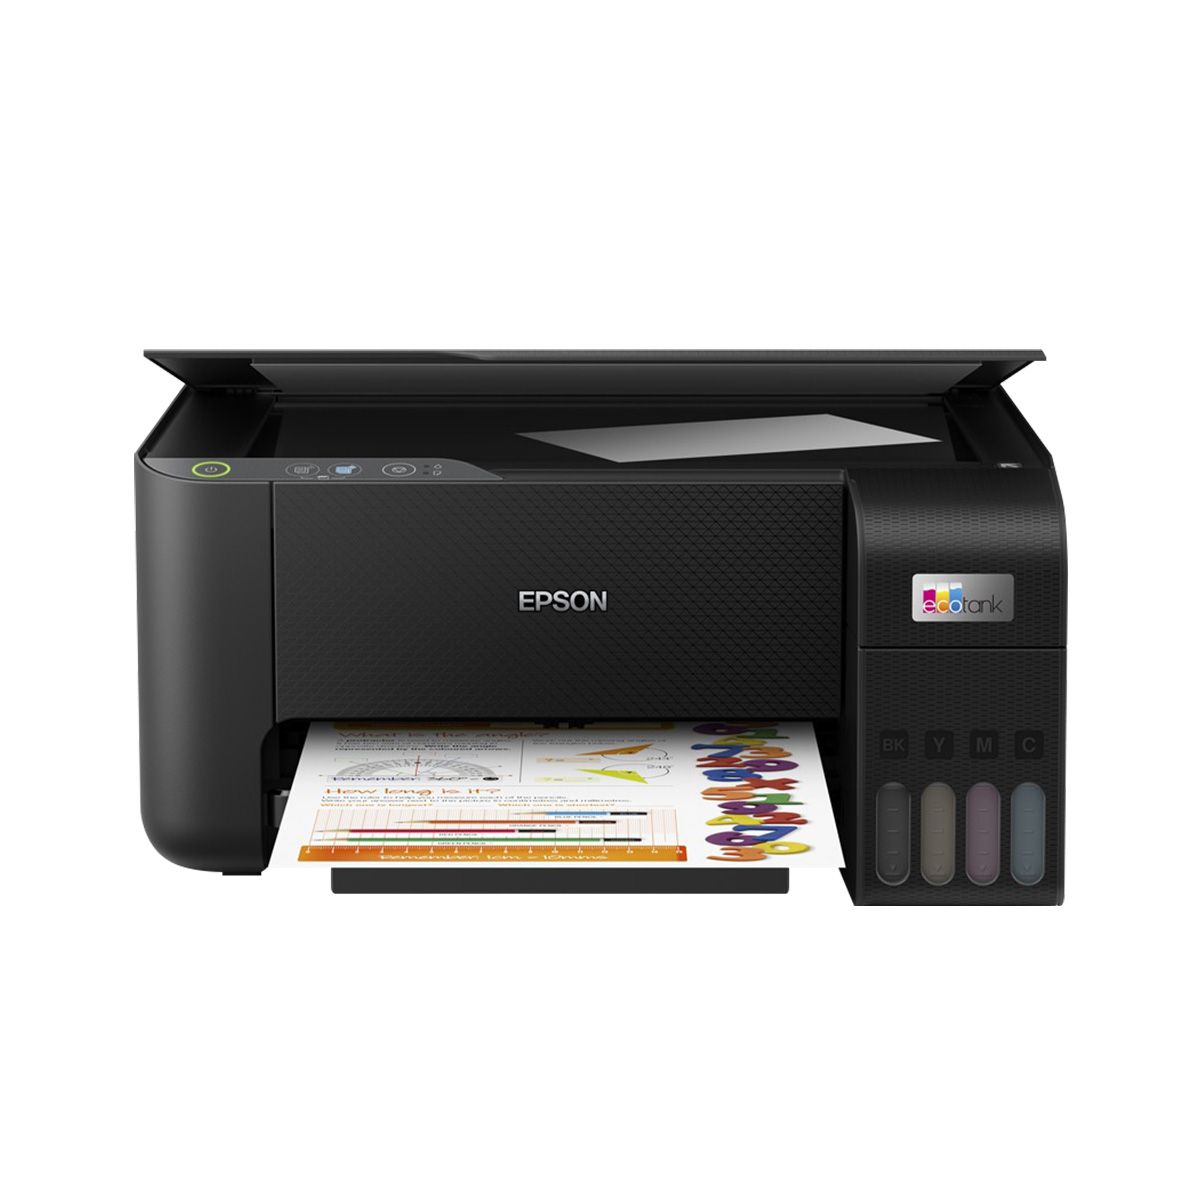 EPSON ECOTANK L3210 A4 ALL-IN-ONE INK TANK PRINTER